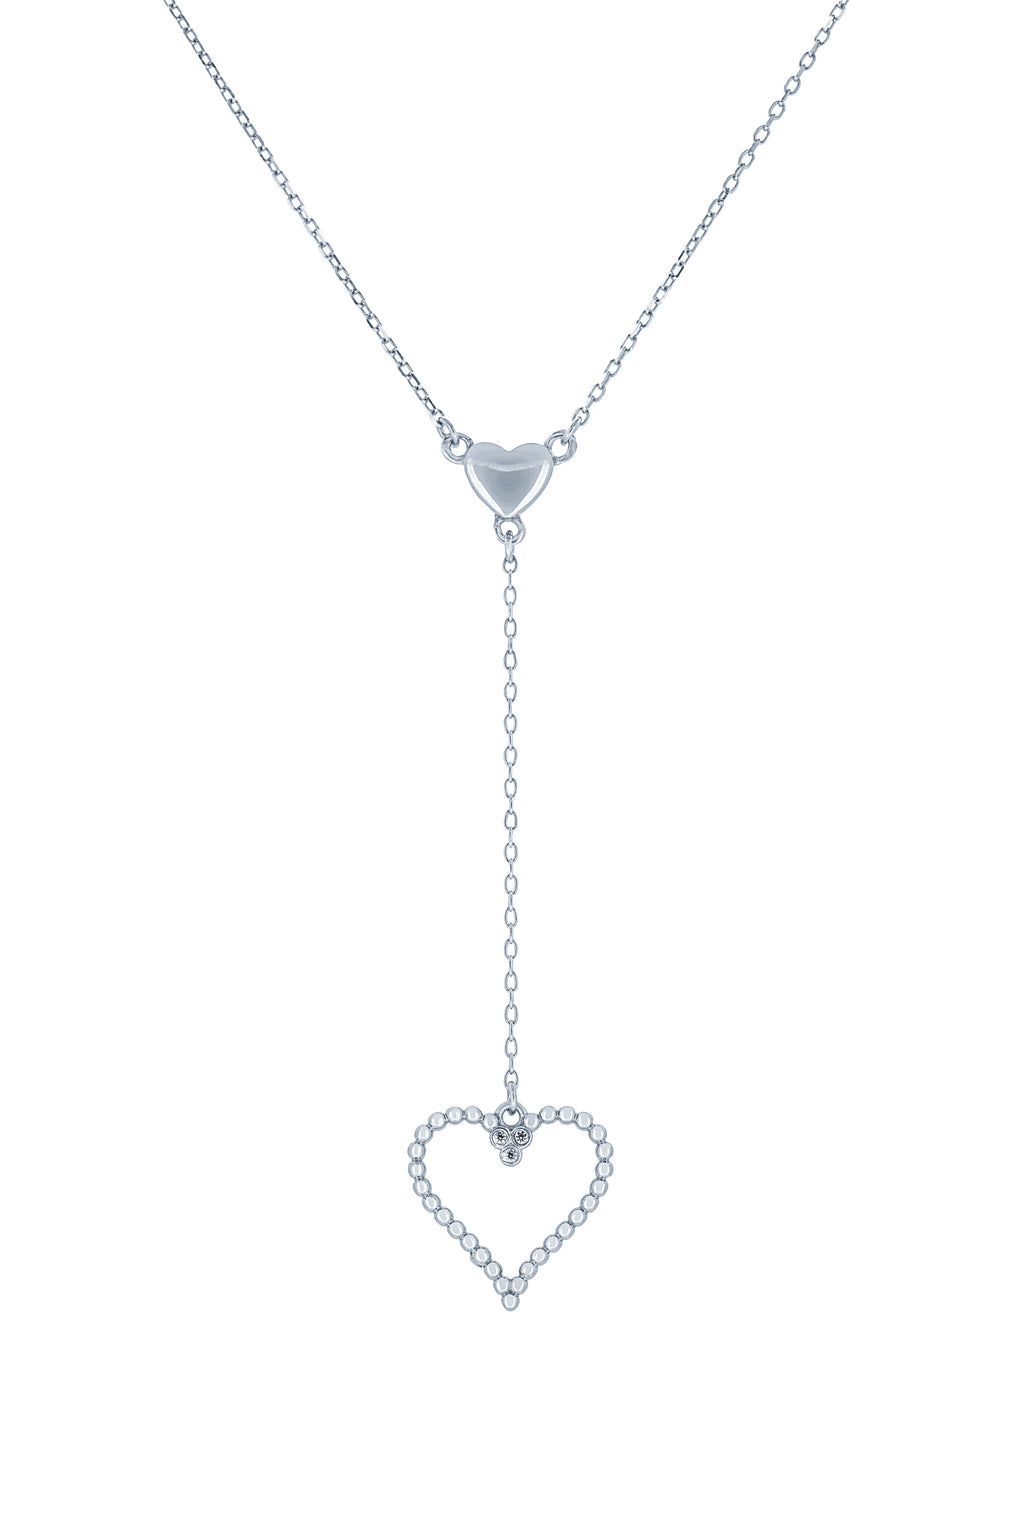 (100073) White Cubic Zirconia Hearts Necklace In Sterling Silver